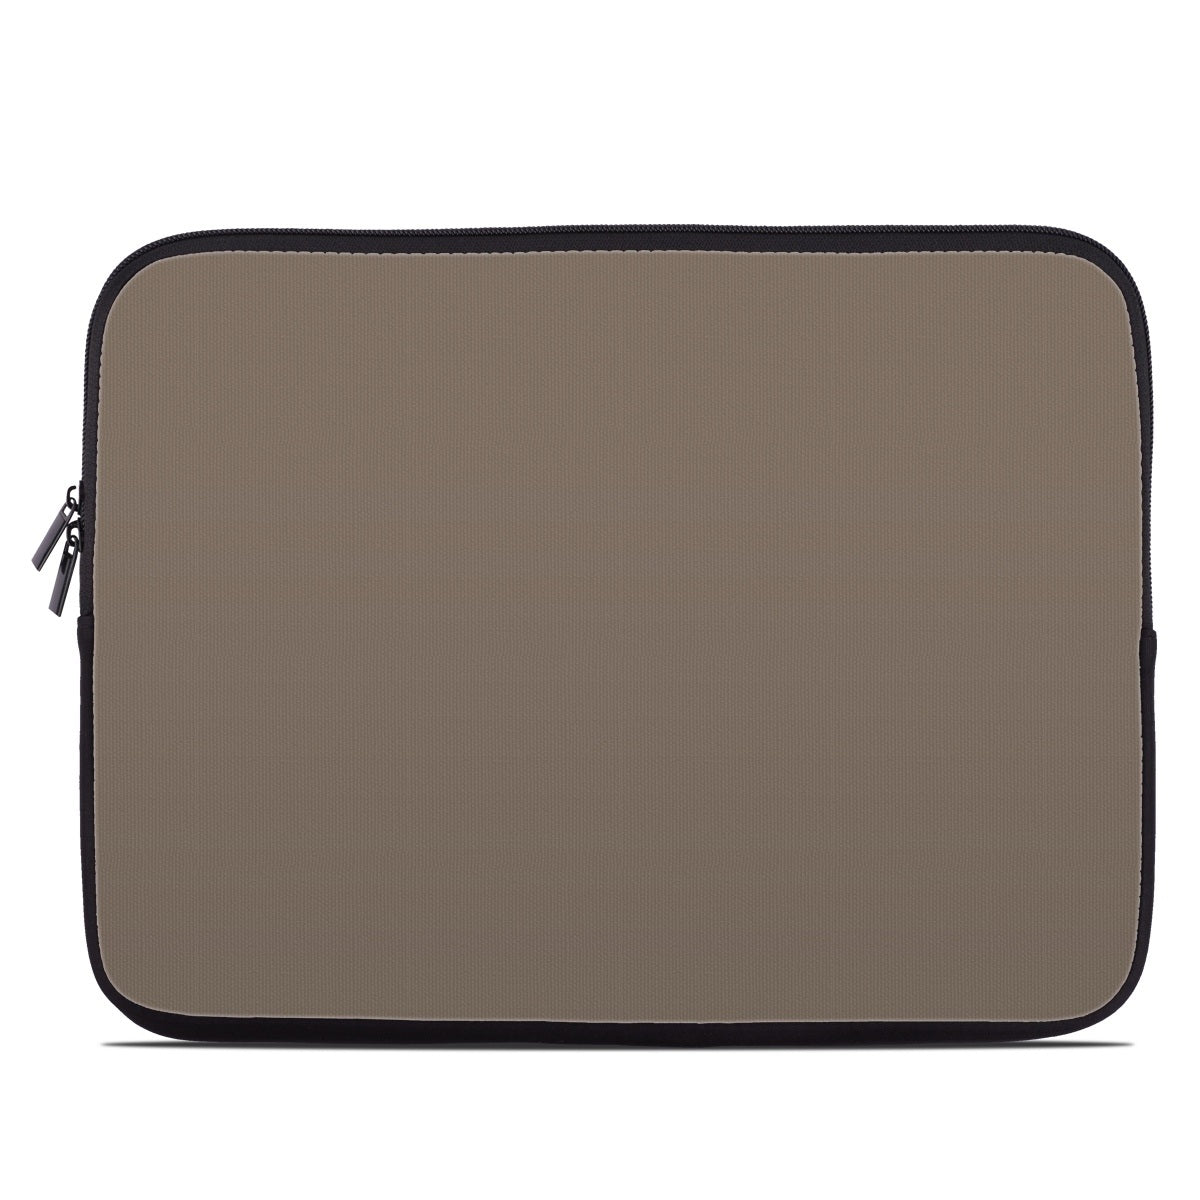 Solid State Flat Dark Earth - Laptop Sleeve